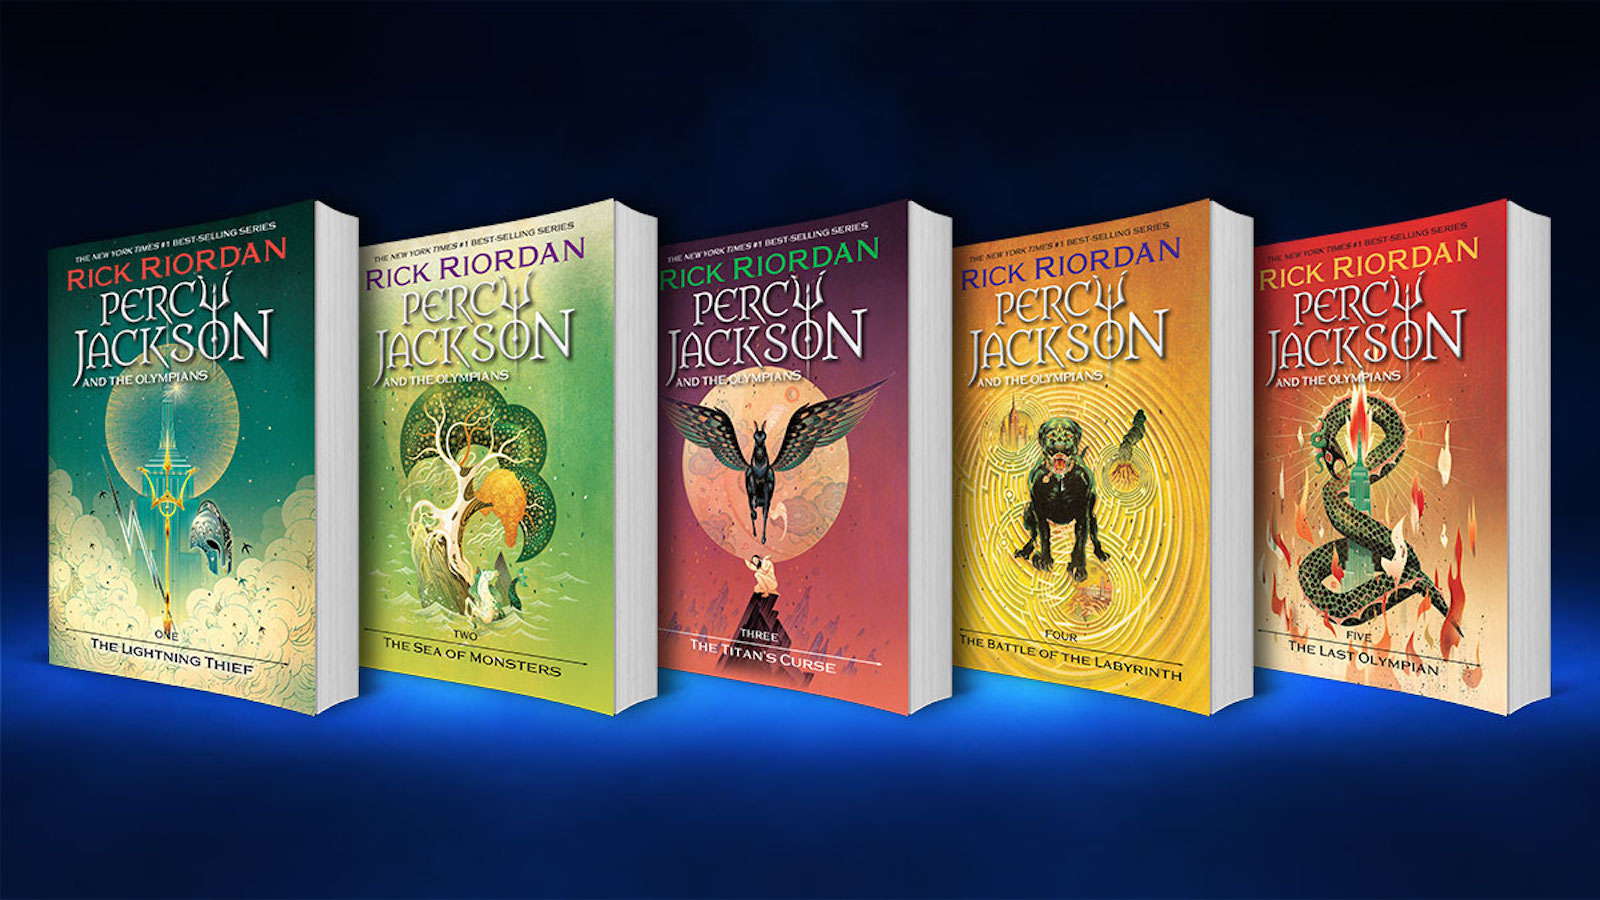 The "Percy Jackson" series is digitally rendered onto a black and blue background. The books are lined up and sngled slightly so that each of their covers can been seen.